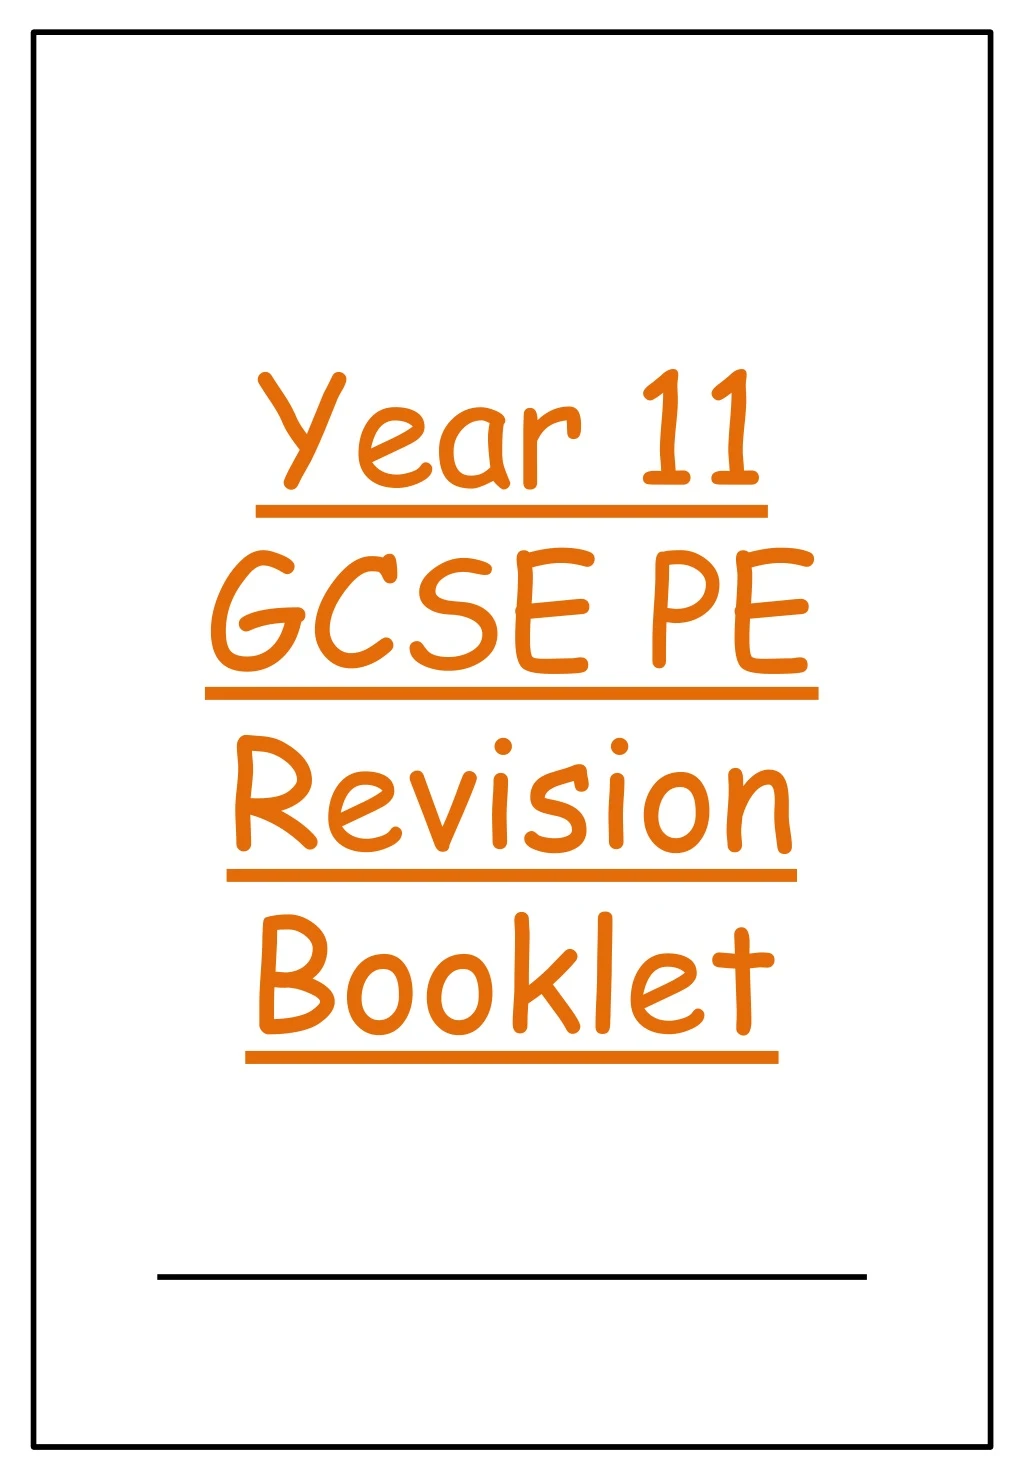 year 11 gcse pe revision booklet